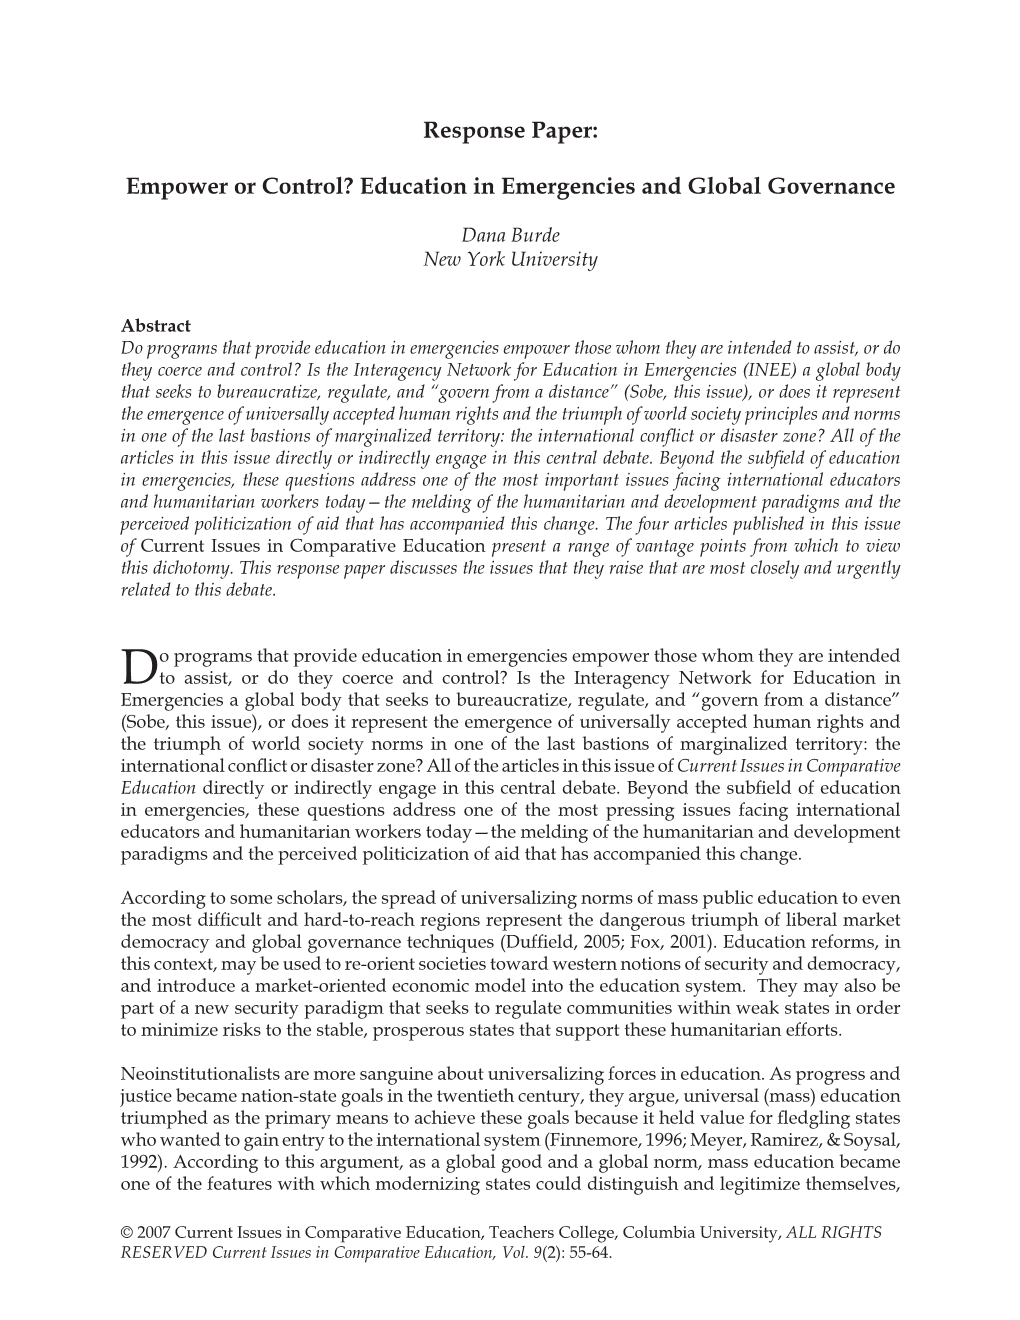 Education in Emergencies and Global Governance